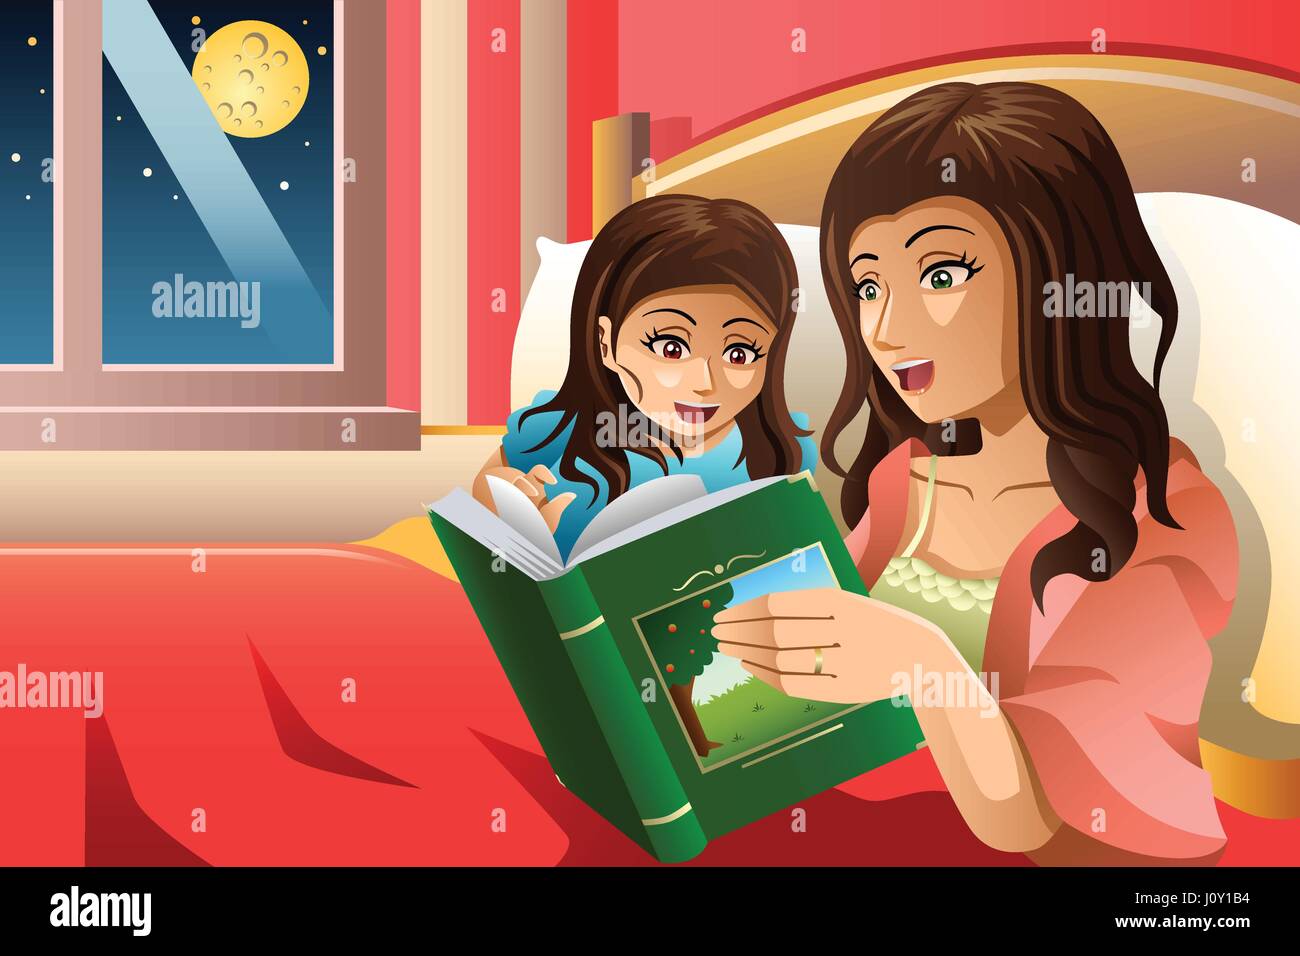 A Vector Illustration Of Mother Telling A Bedtime Story To Her Daughter